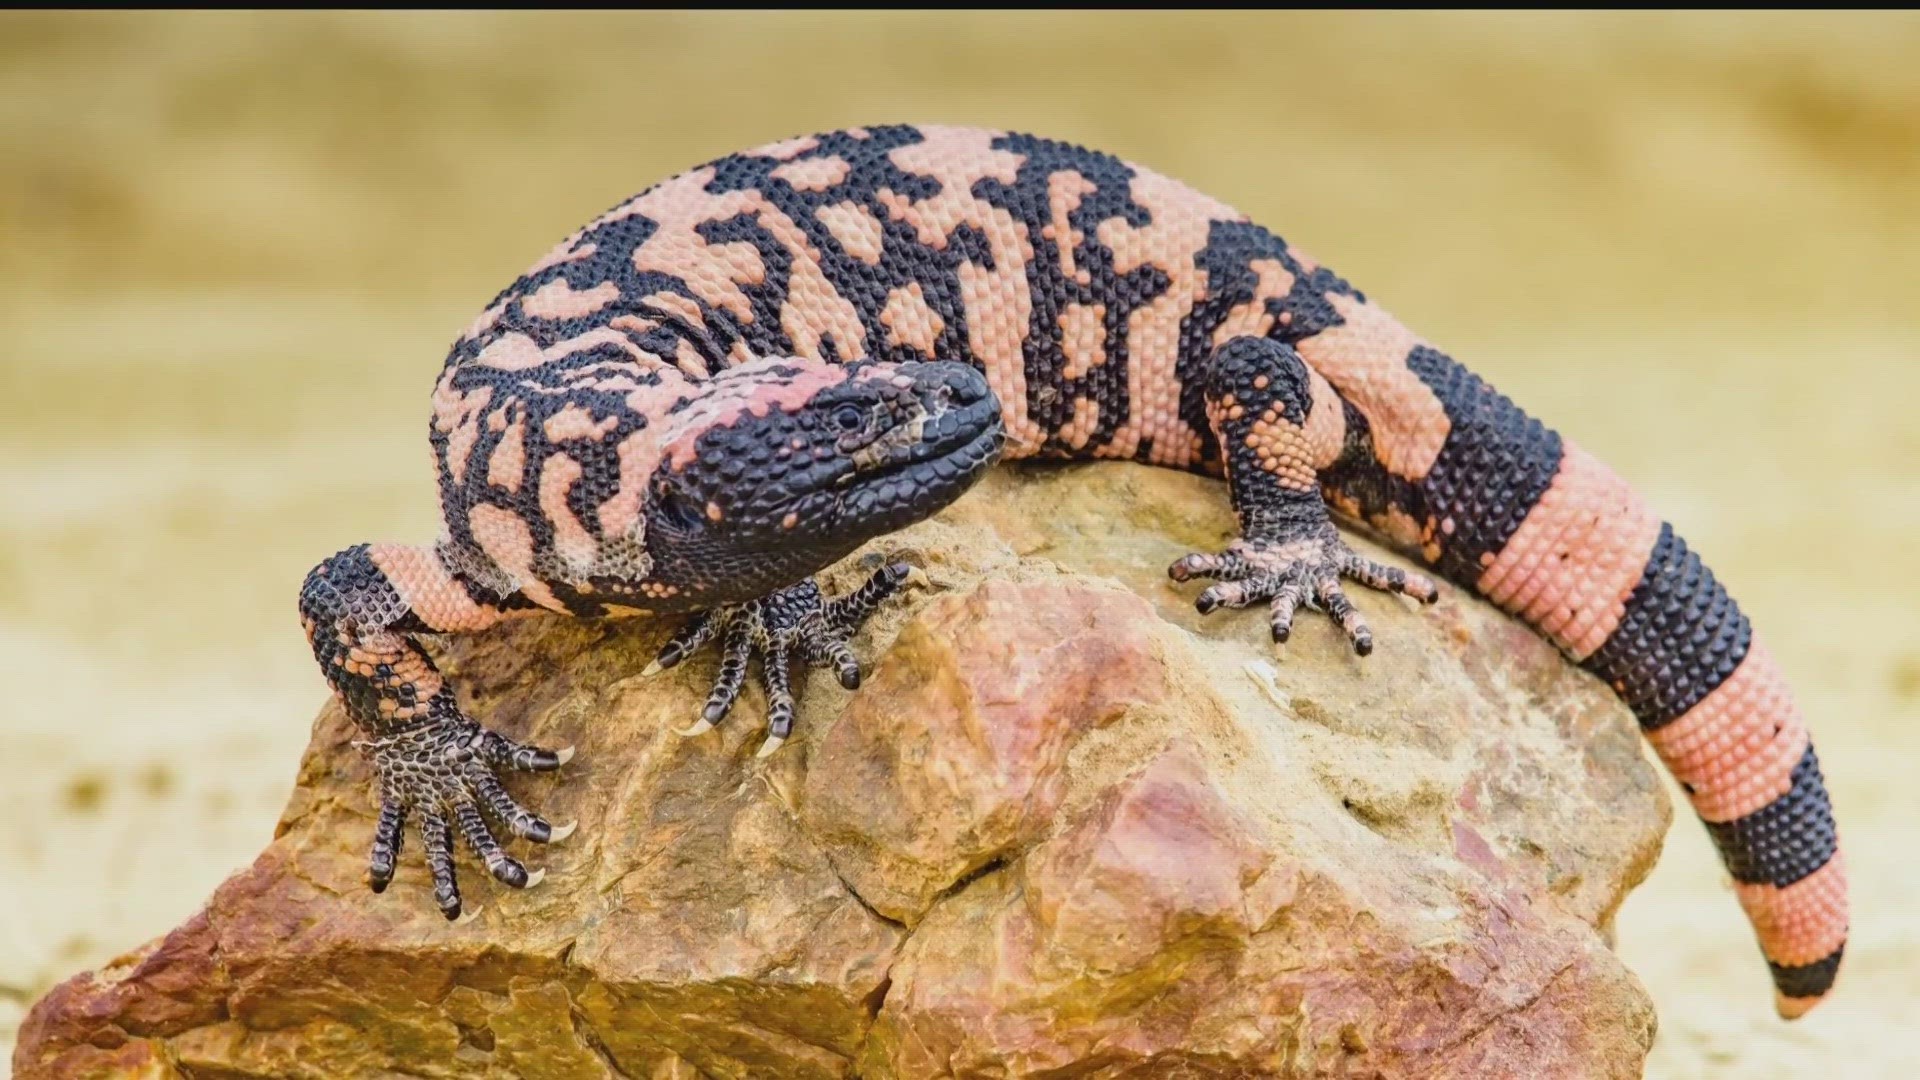 A 34-year-old man from Lakewood was bitten by one of his two Gila monsters and died days later.